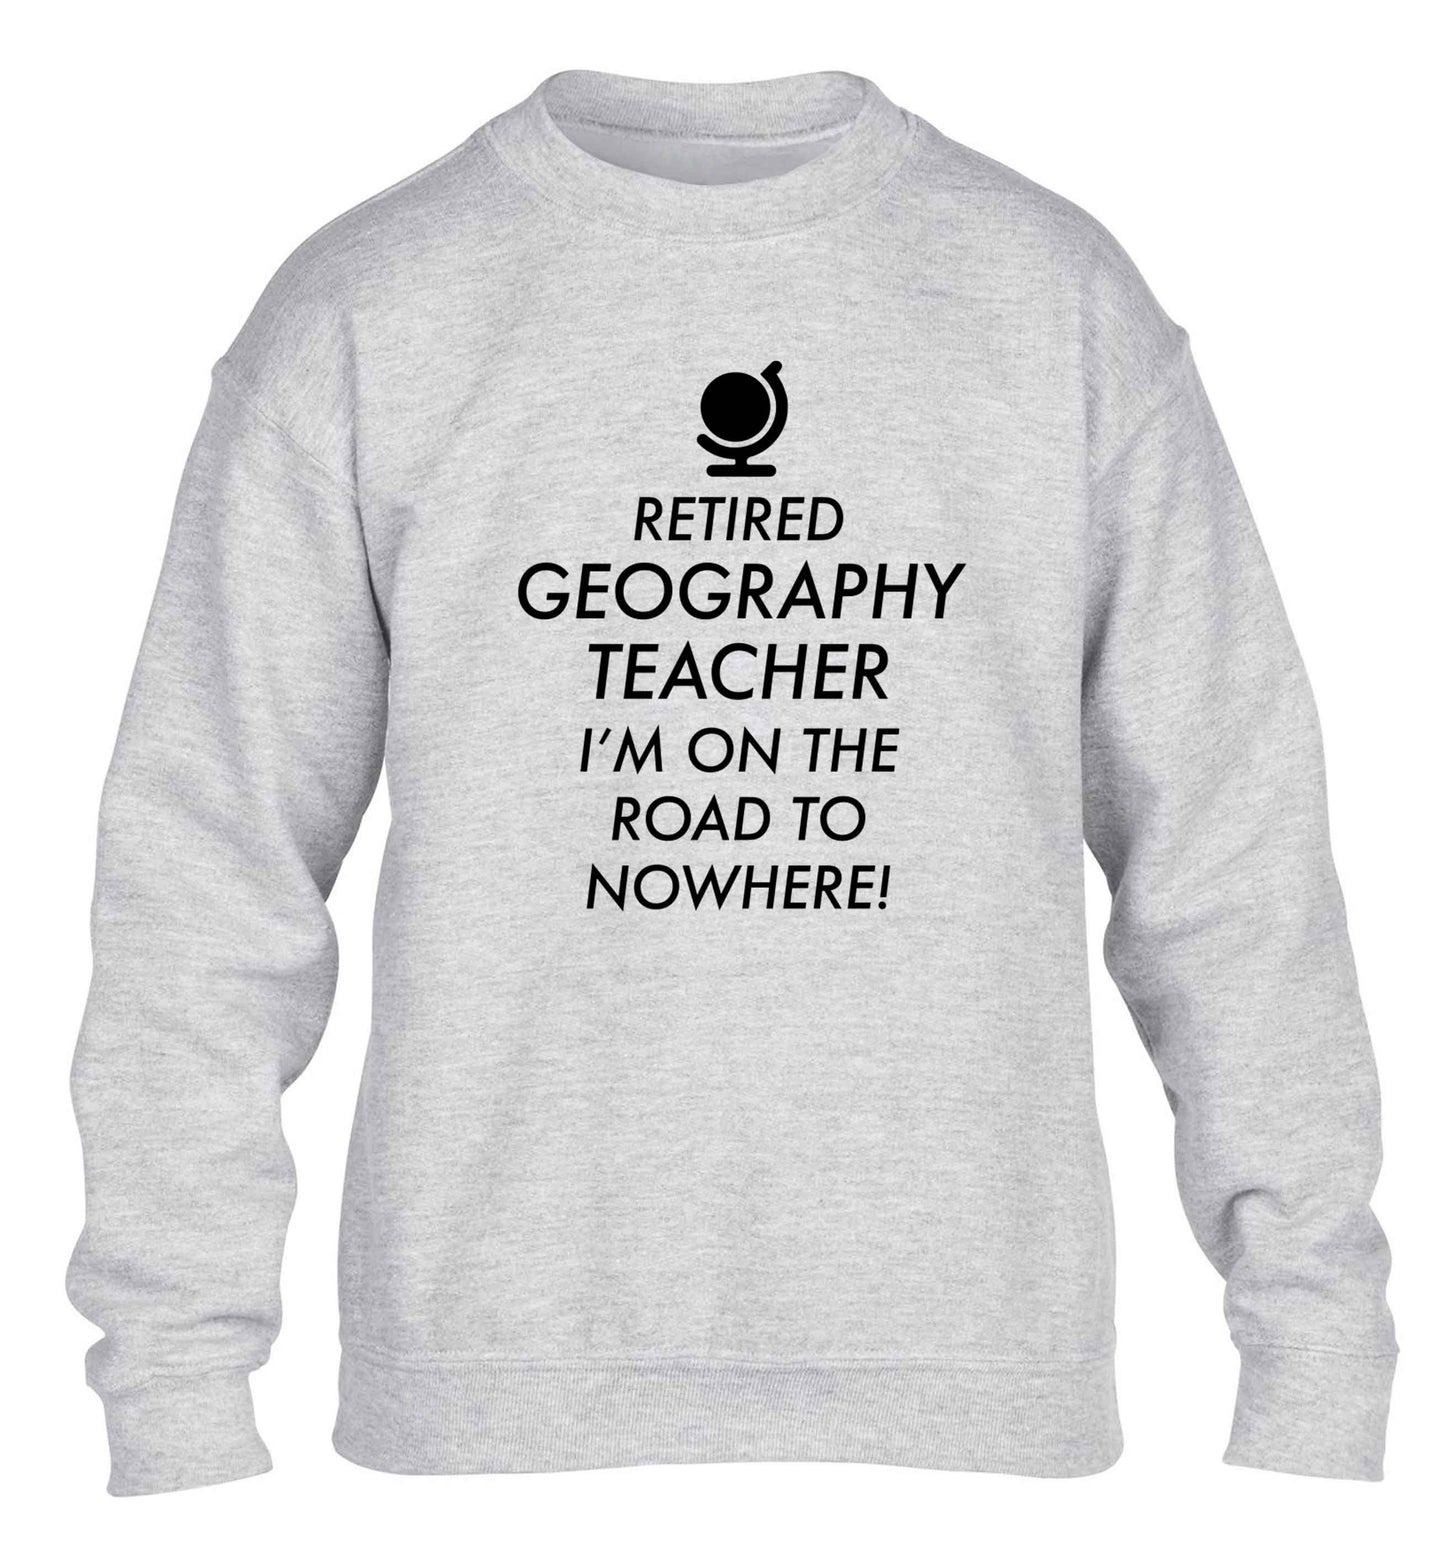 Retired geography teacher I'm on the road to nowhere children's grey sweater 12-13 Years